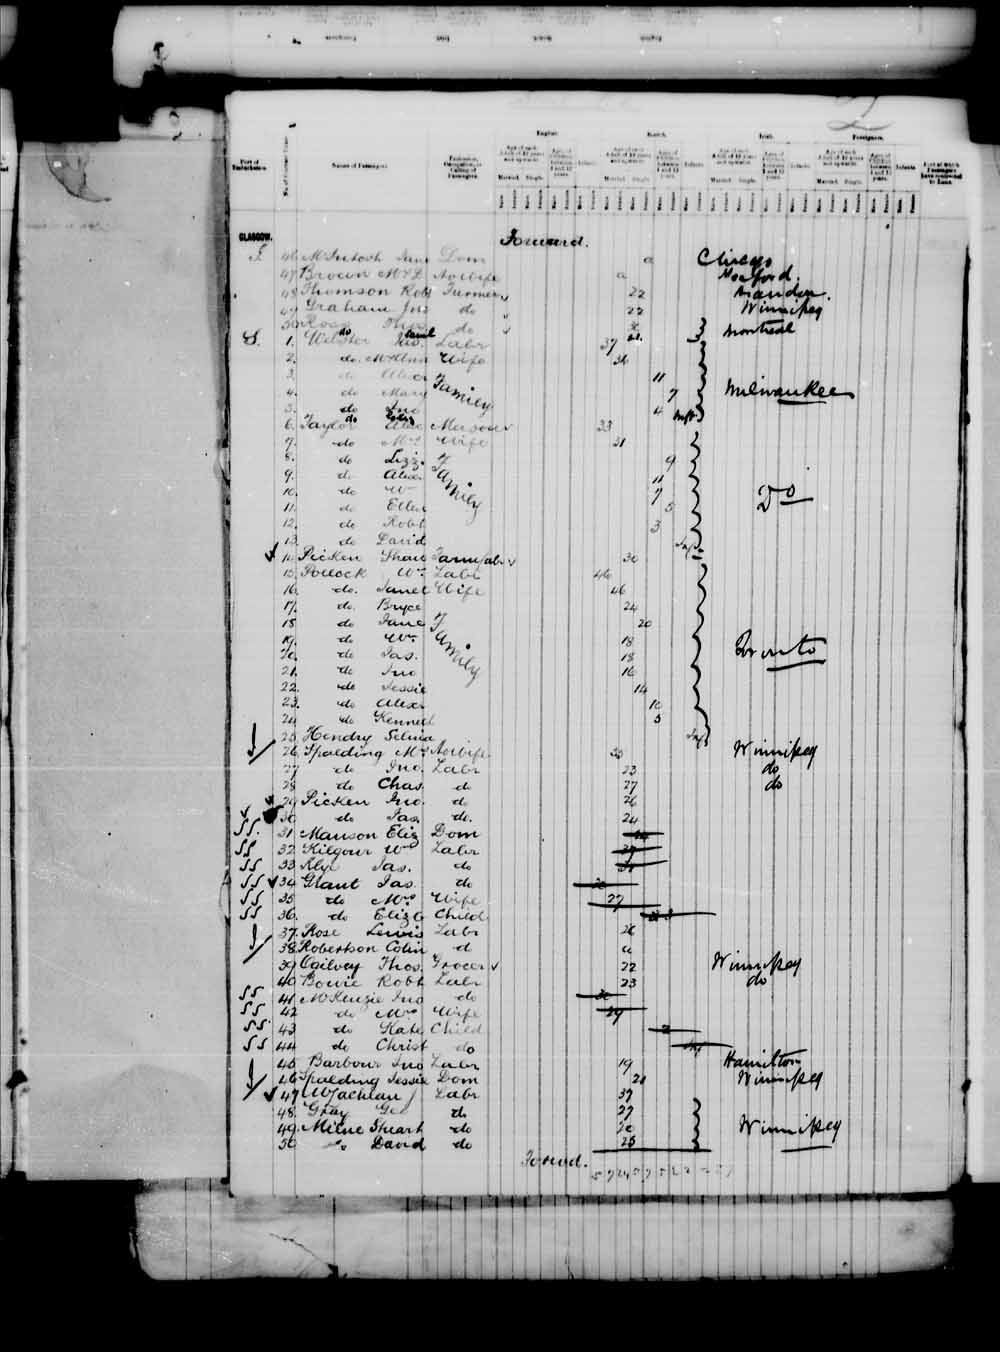 Digitized page of Passenger Lists for Image No.: e003542662